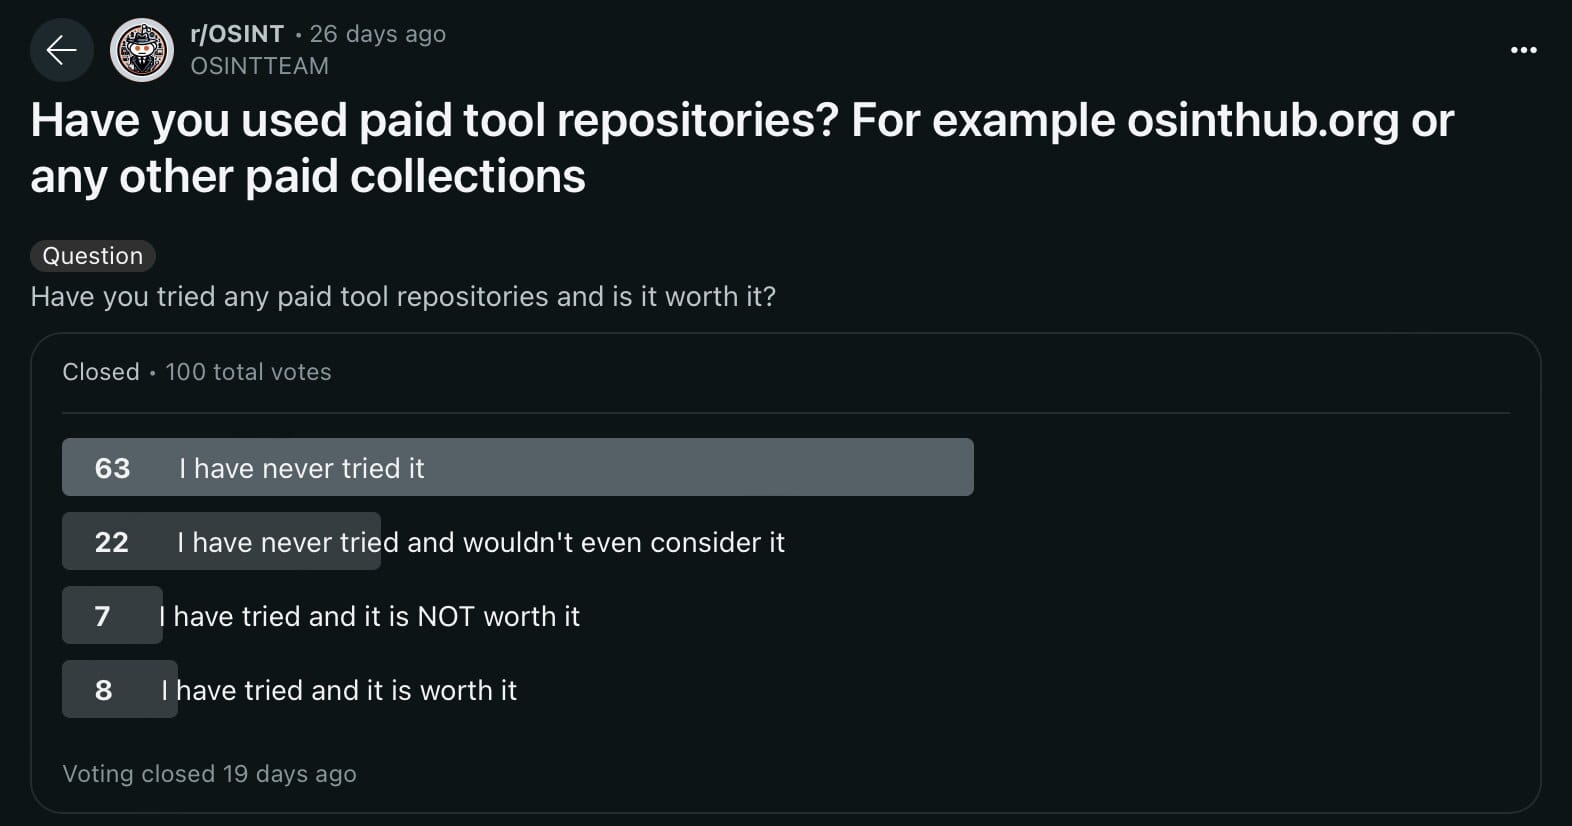 Our Reddit poll indicates that the vast majority uses free methods to find tools